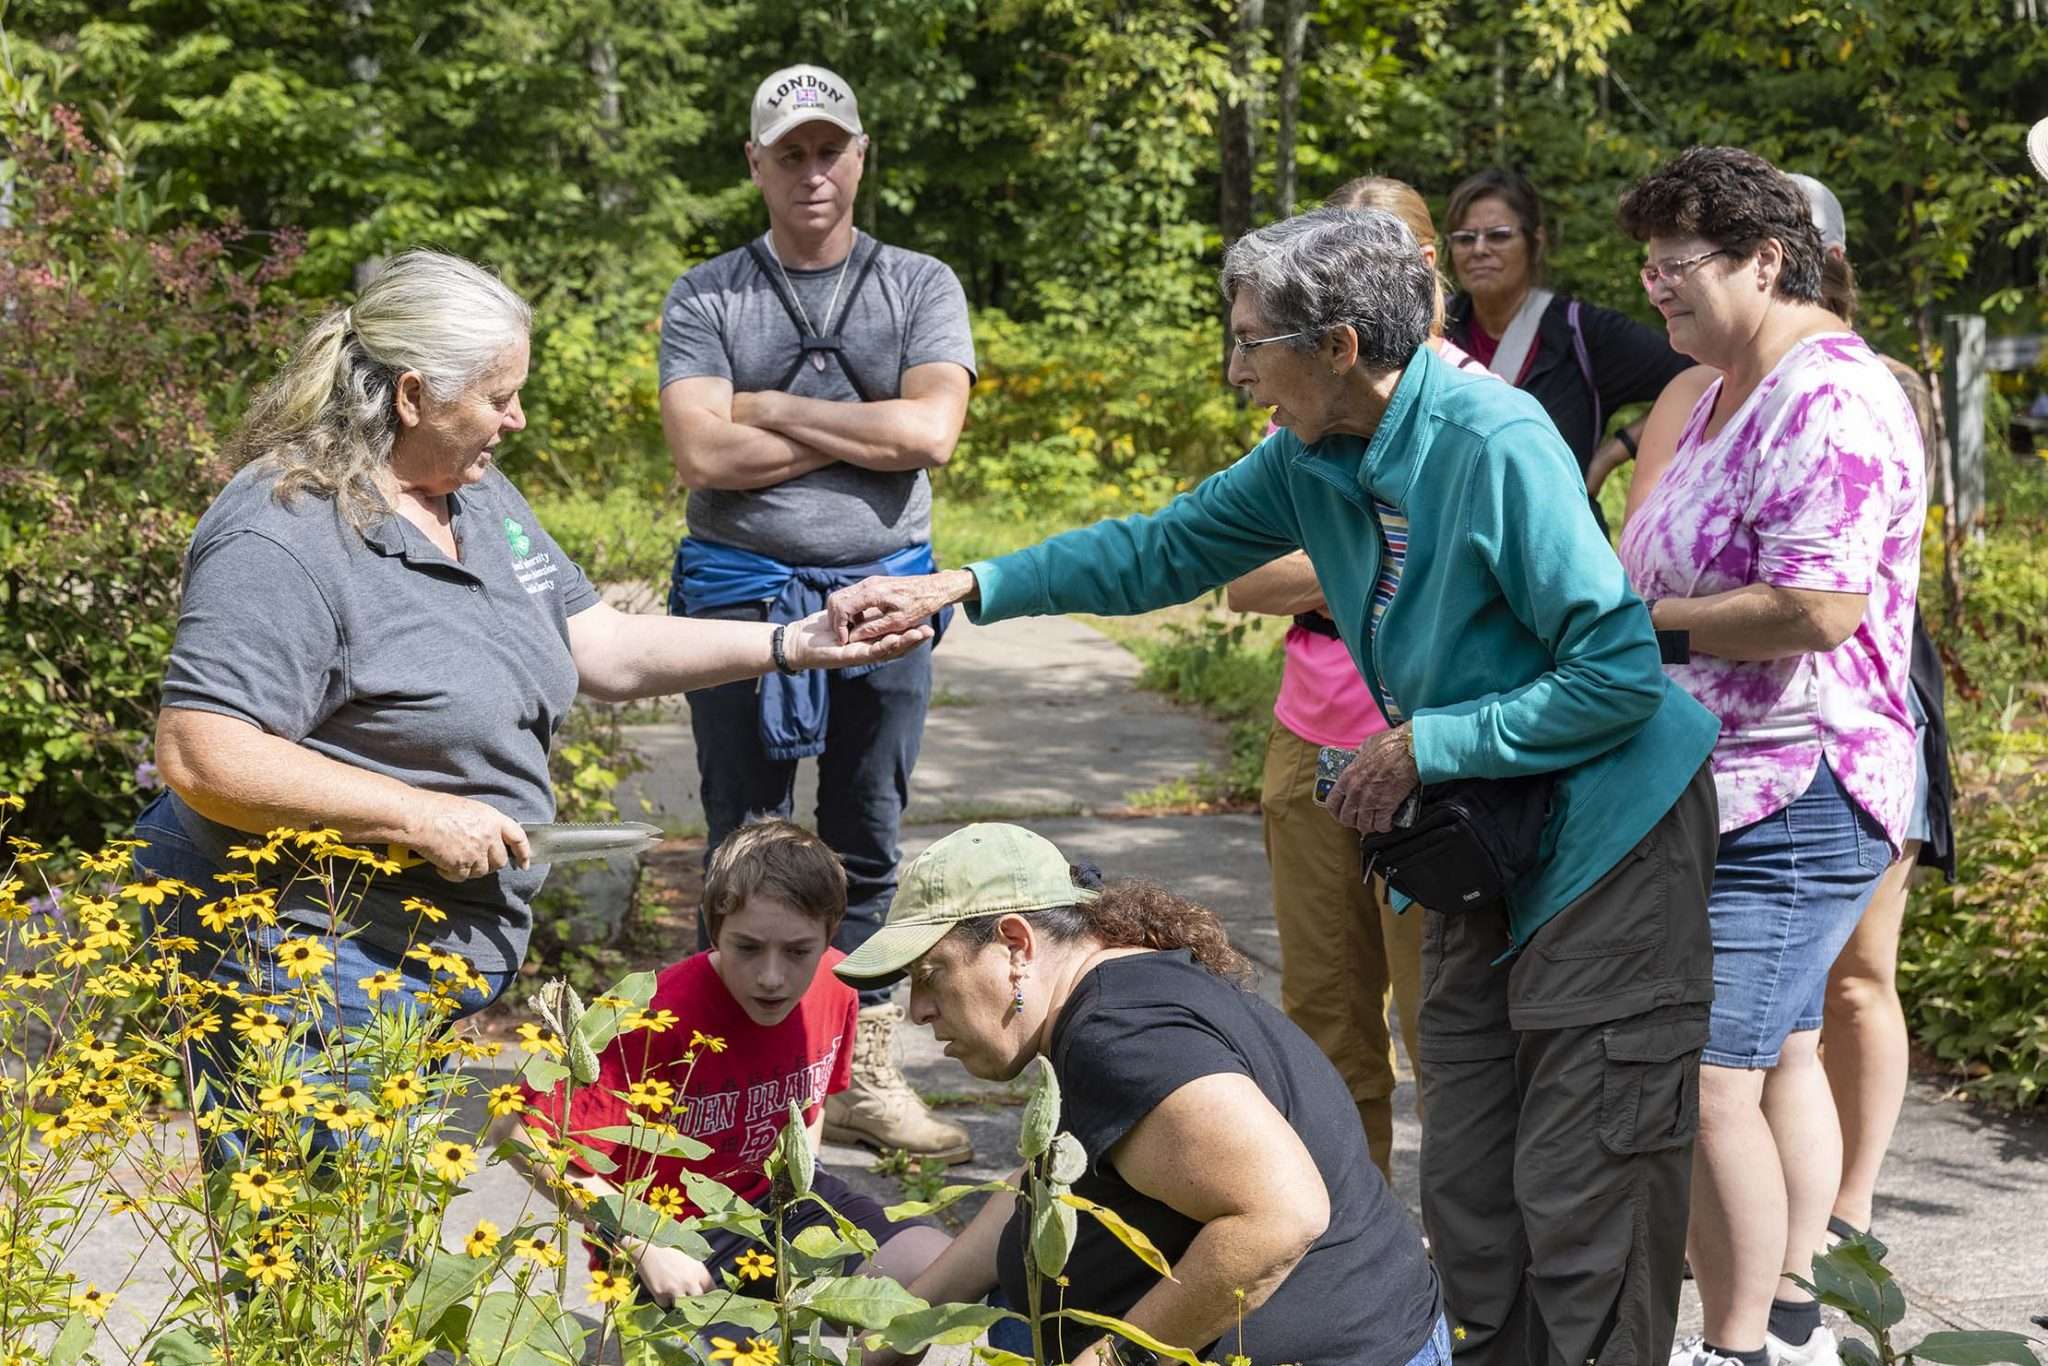 Pat Banker, of Cornell University Cooperative Extension, is an expert in wild edible plants. Here, she leads a tour at the Paul Smiths VIC on Wednesday, August 24. Photo by Mike Lynch